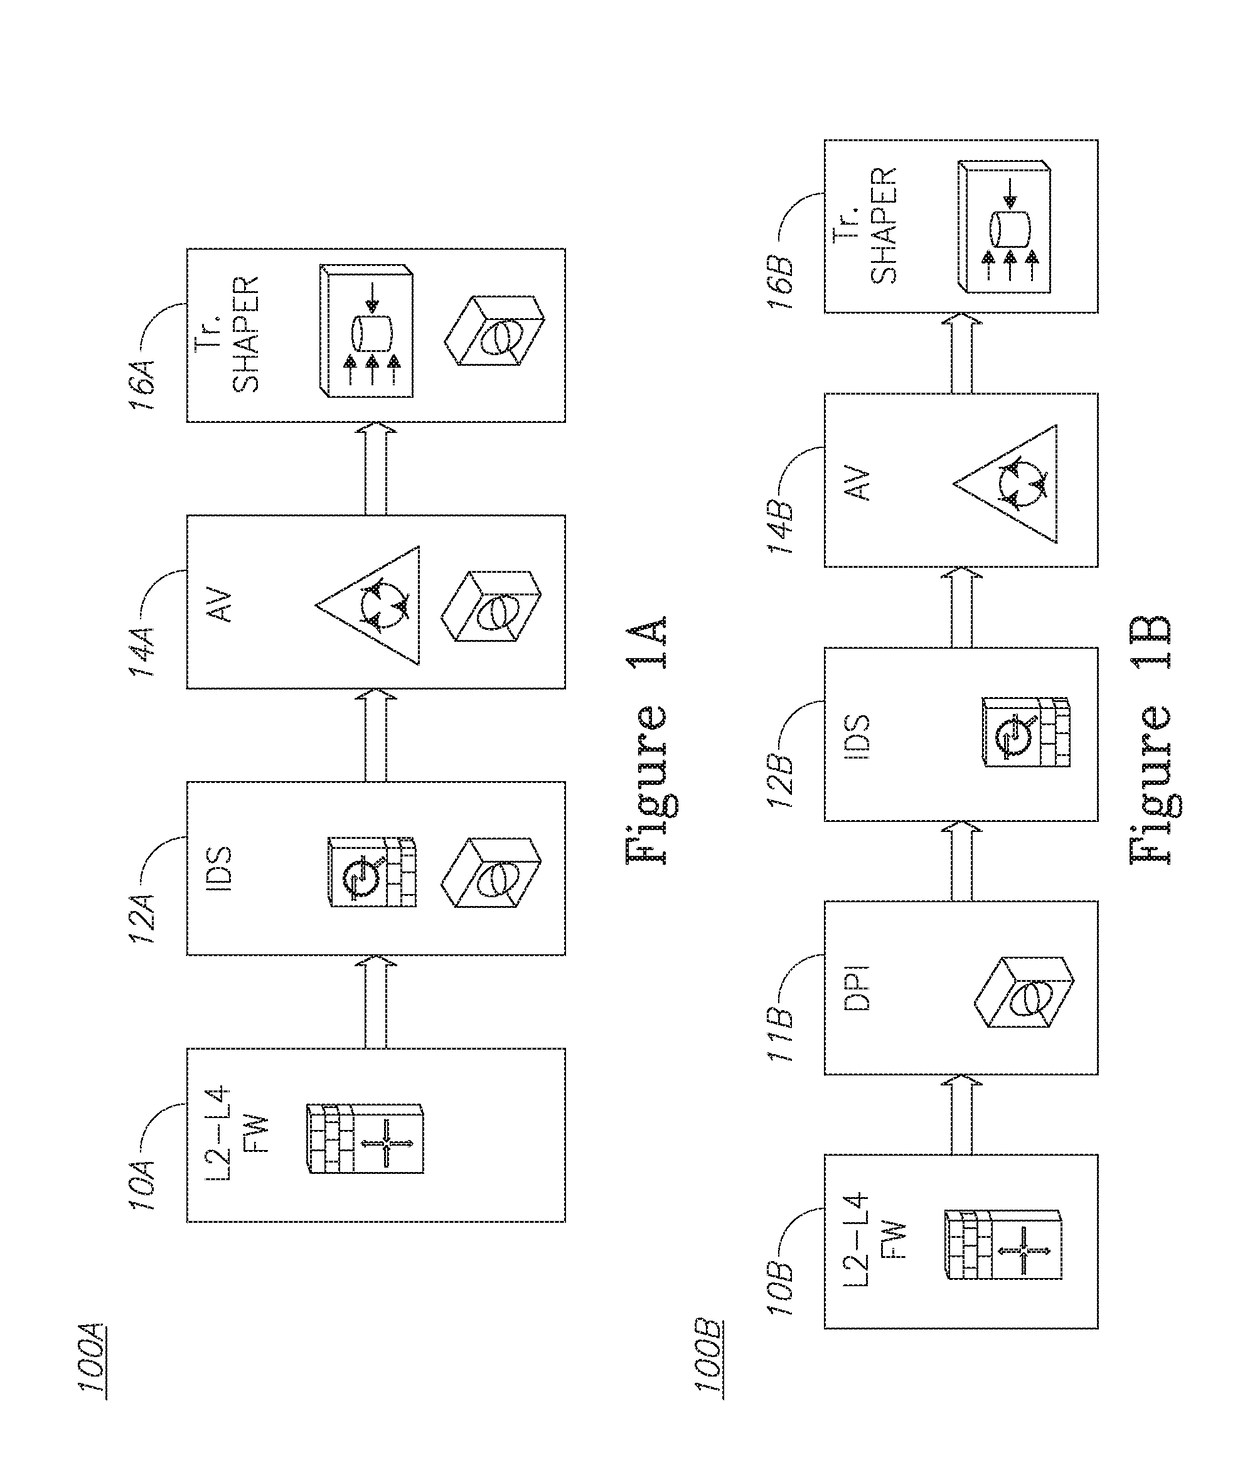 Method and system for providing deep packet inspection as a service